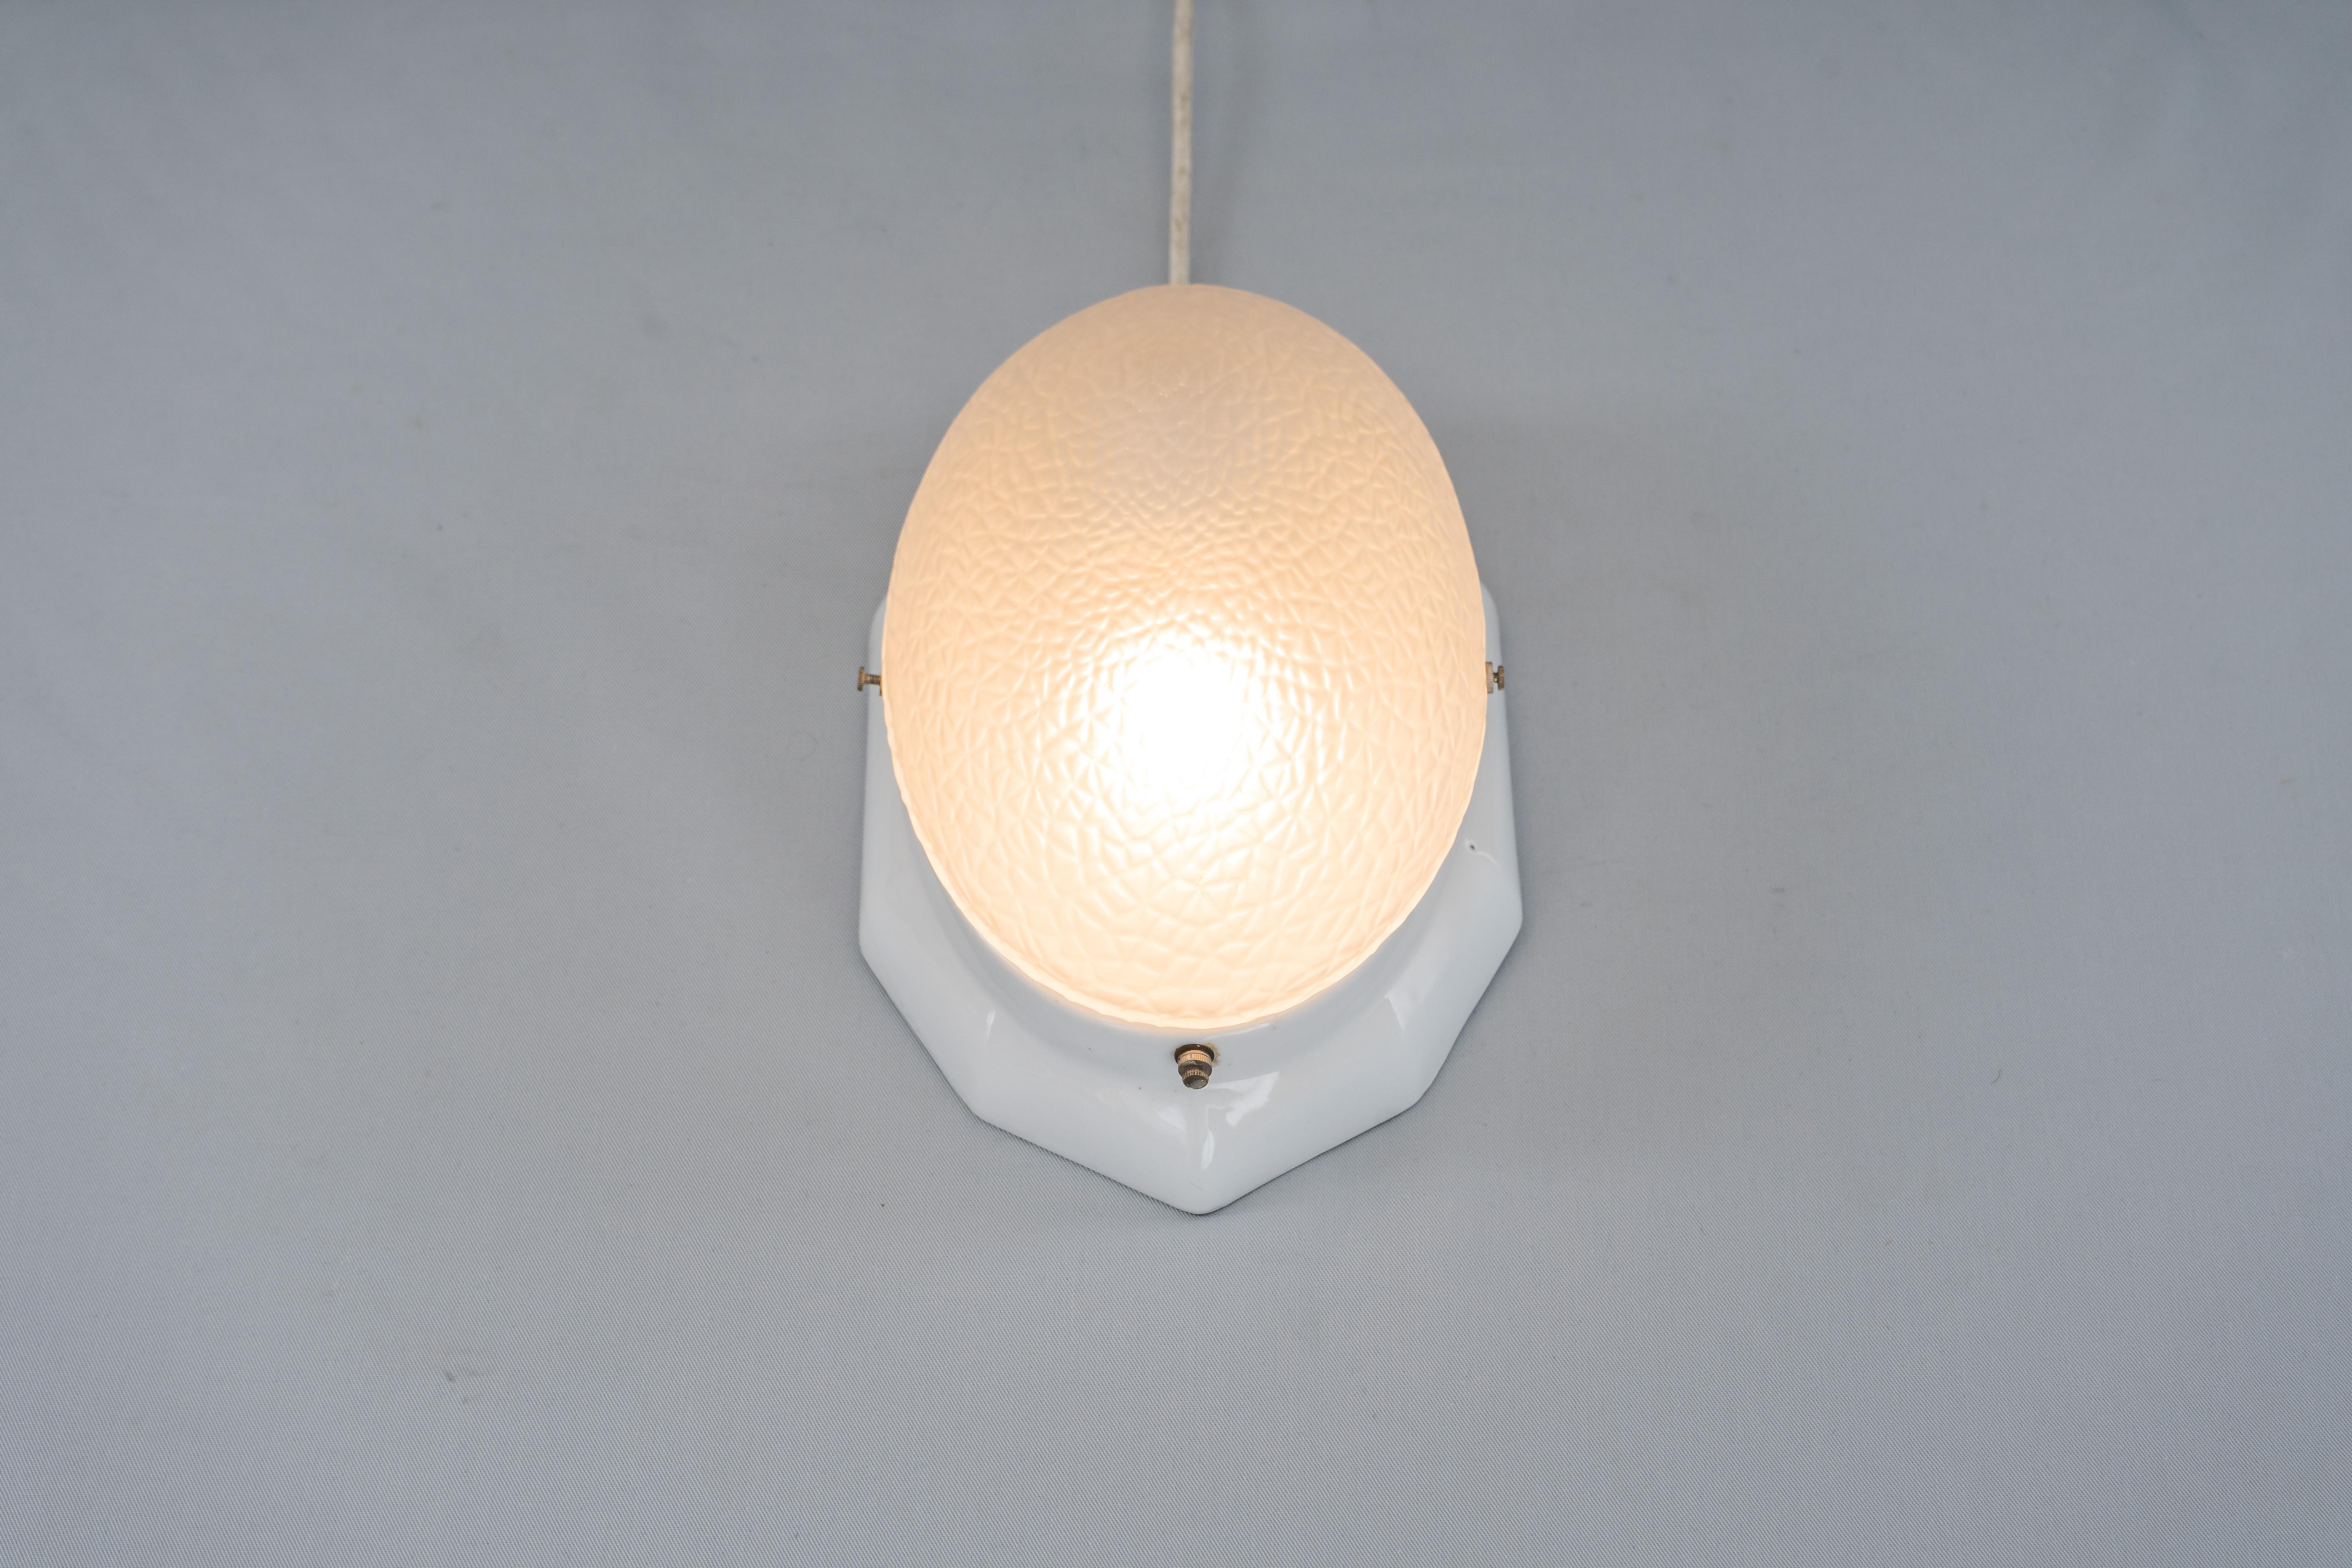 White Oval Porcelain Wall or Ceiling Lamp with Original Glass Shade, circa 1920s For Sale 3